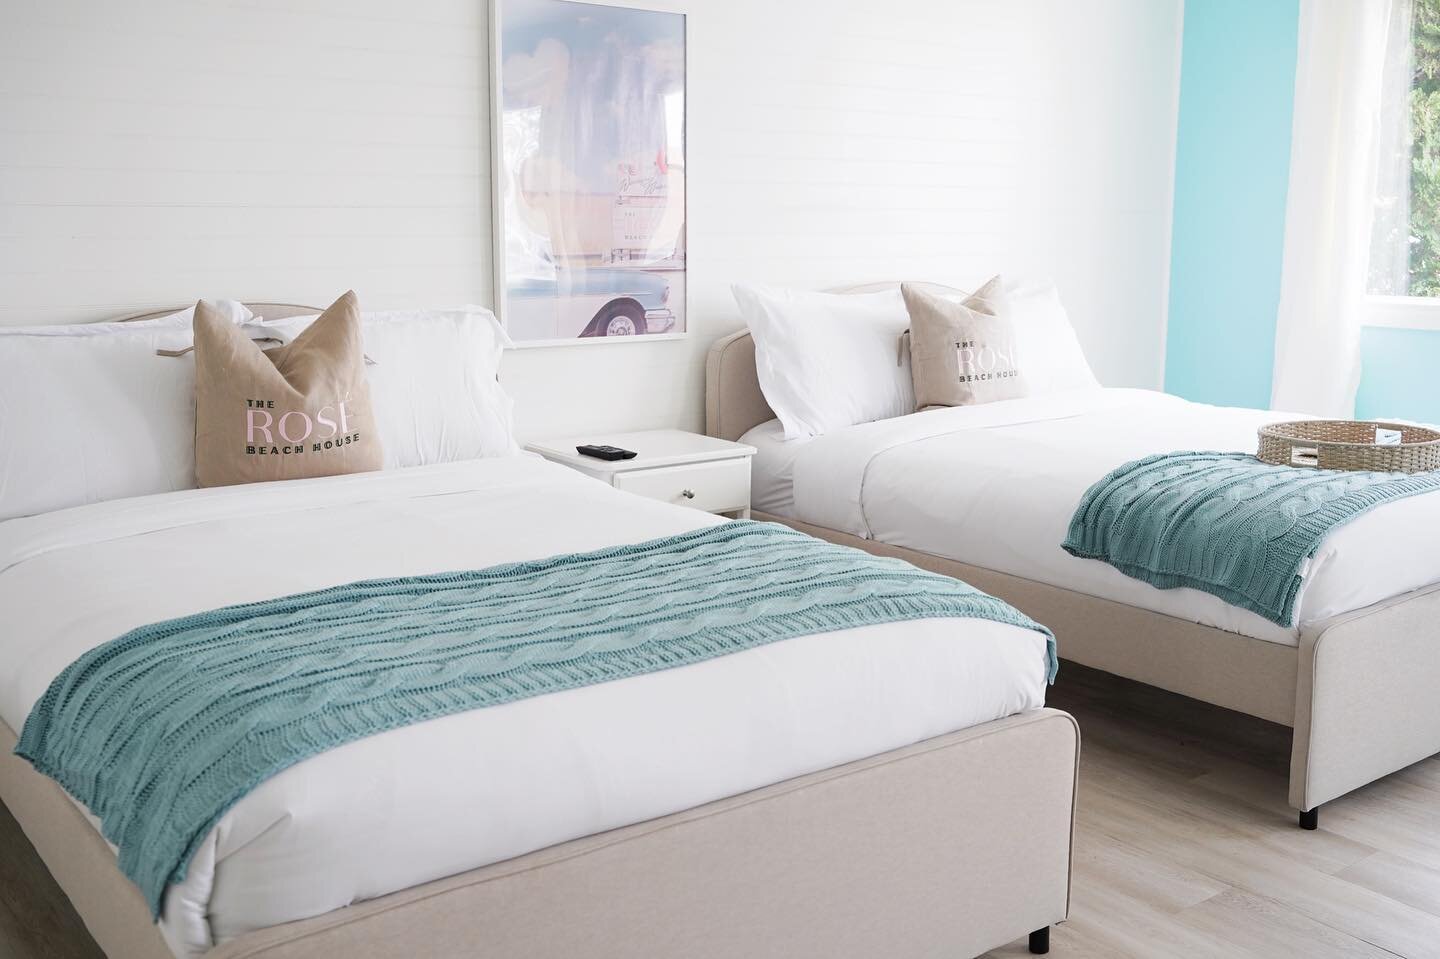 Stay with us in the Lorraine Suite tomorrow night! What better way to kick off your weekend than at the beach!?🩵☀️ 

Link to book is in our bio or you can send us a message!

#lorrainesuite #staywithus #winnipegbeach